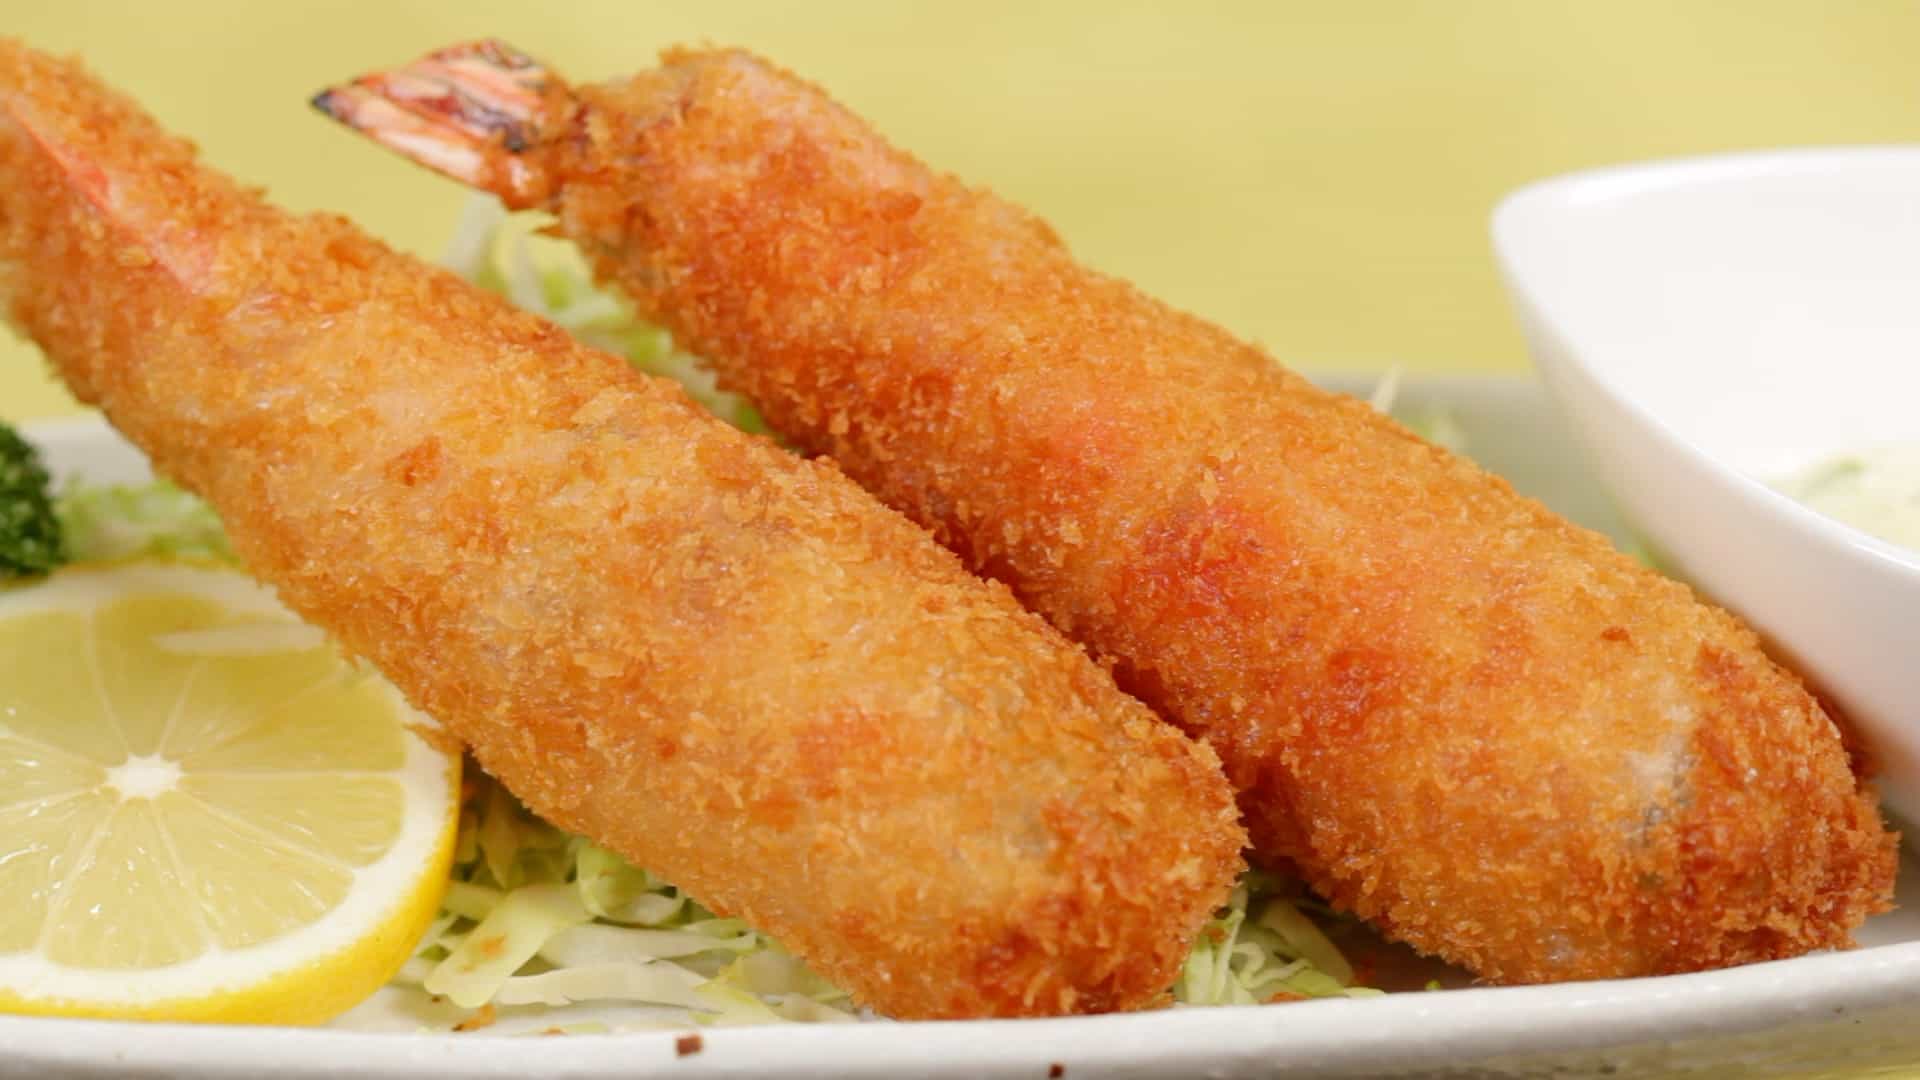 Jumbo Ebi Fry Recipe Deep Fried Breaded Prawns With Asparagus Fried Shrimp Cooking With Dog,Sweet Chili Sauce Brands